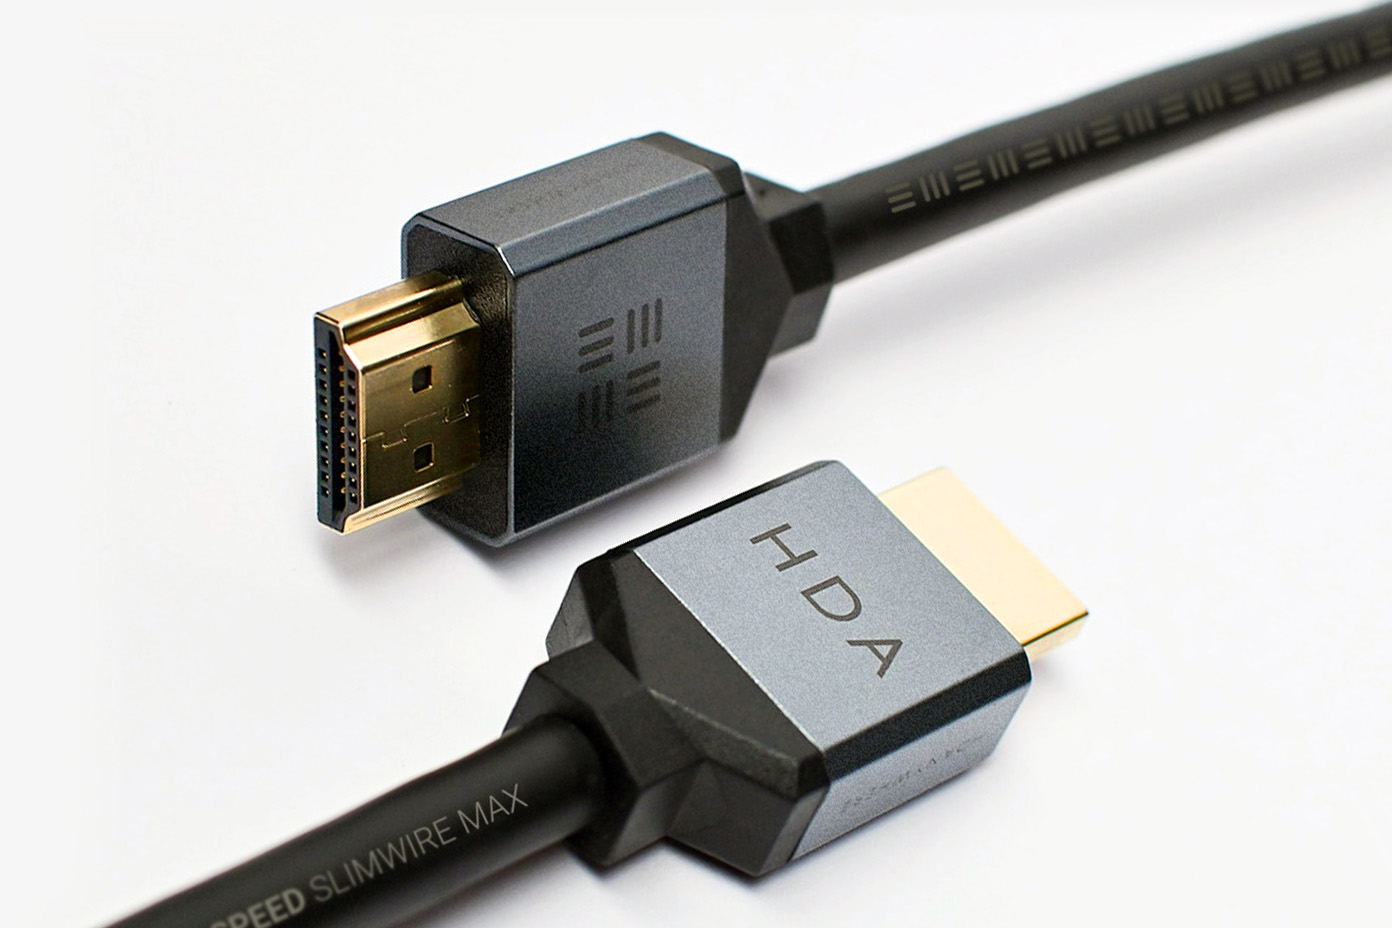 HDANYWHERE 4K and 8K HDMI Cables. Watching great TV or gaming on the very best setup starts here.